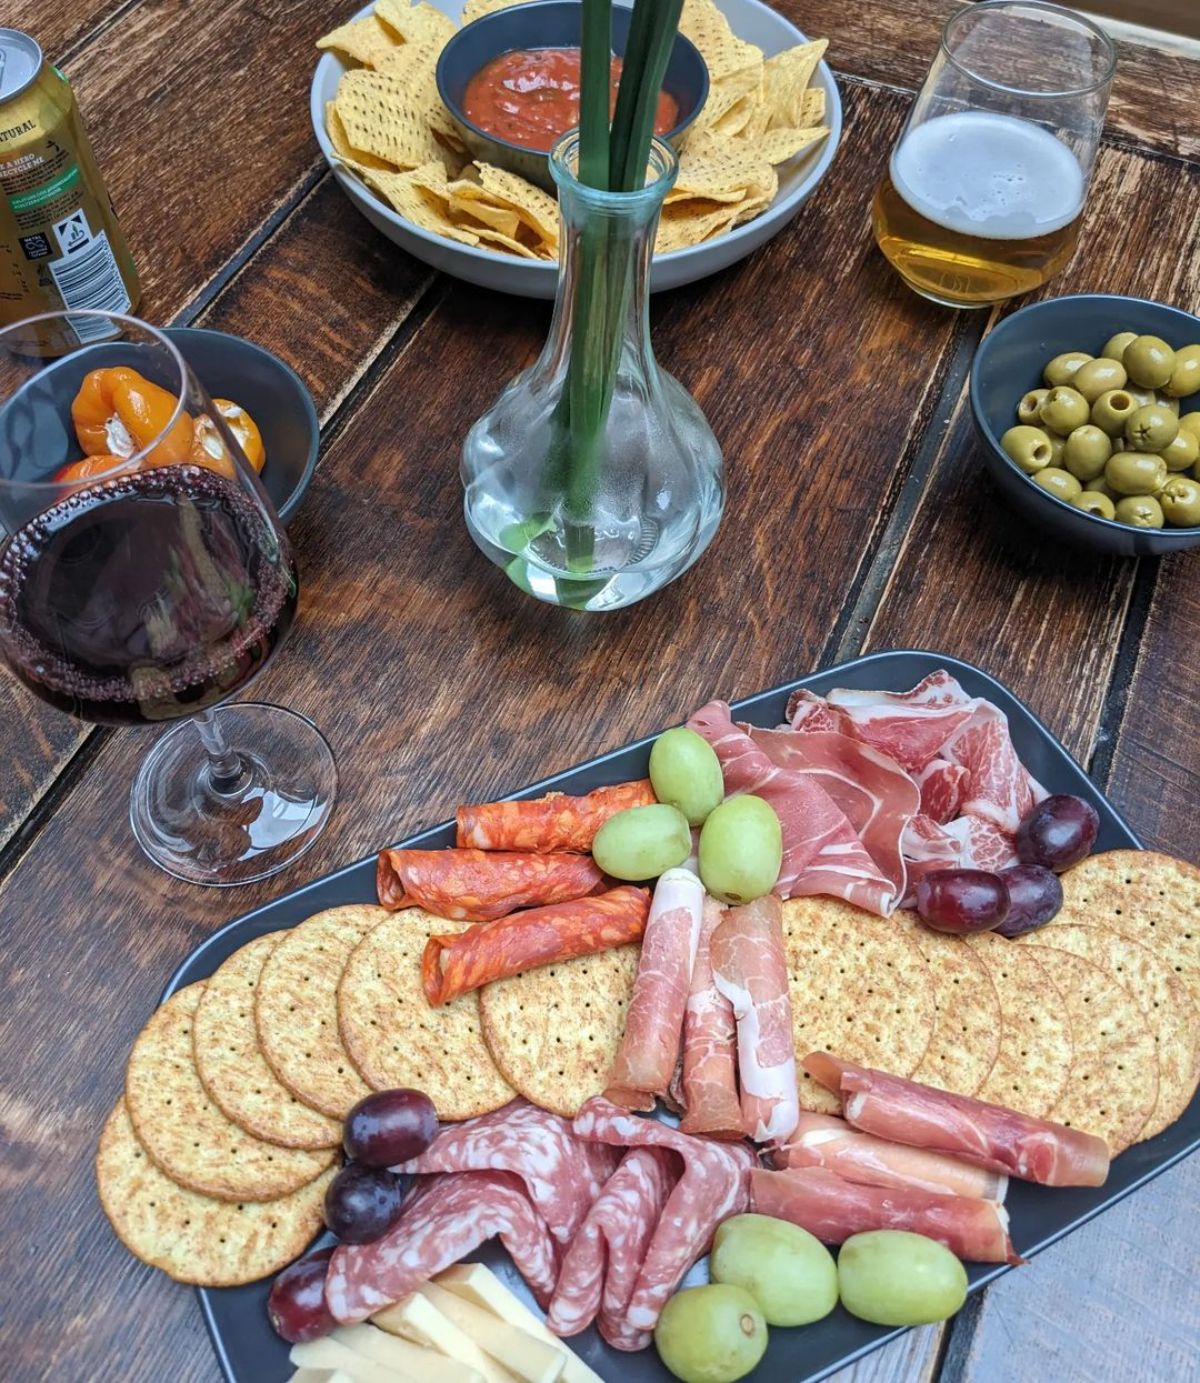 Gluten-Free Cured Meats with crackers and fruits on a gray tray.